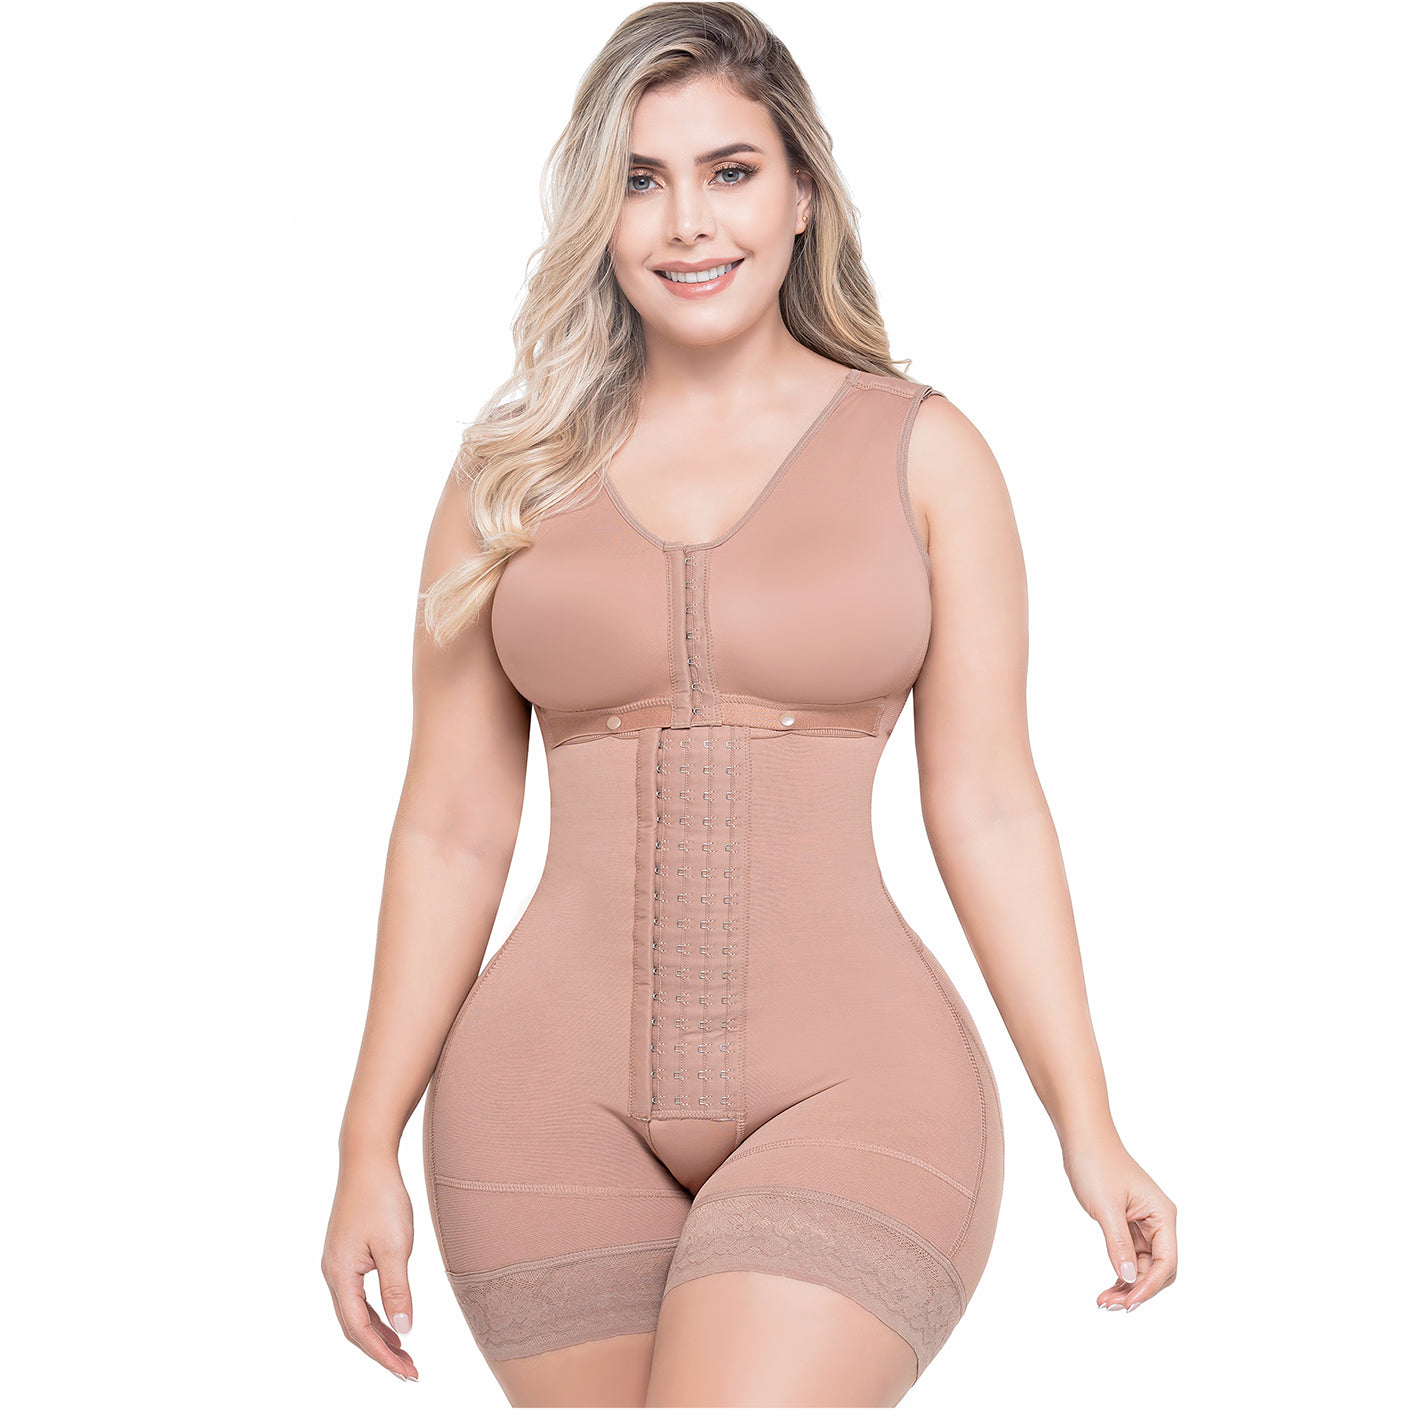 The faja carola–3019 is a short type girdle with silicone lace